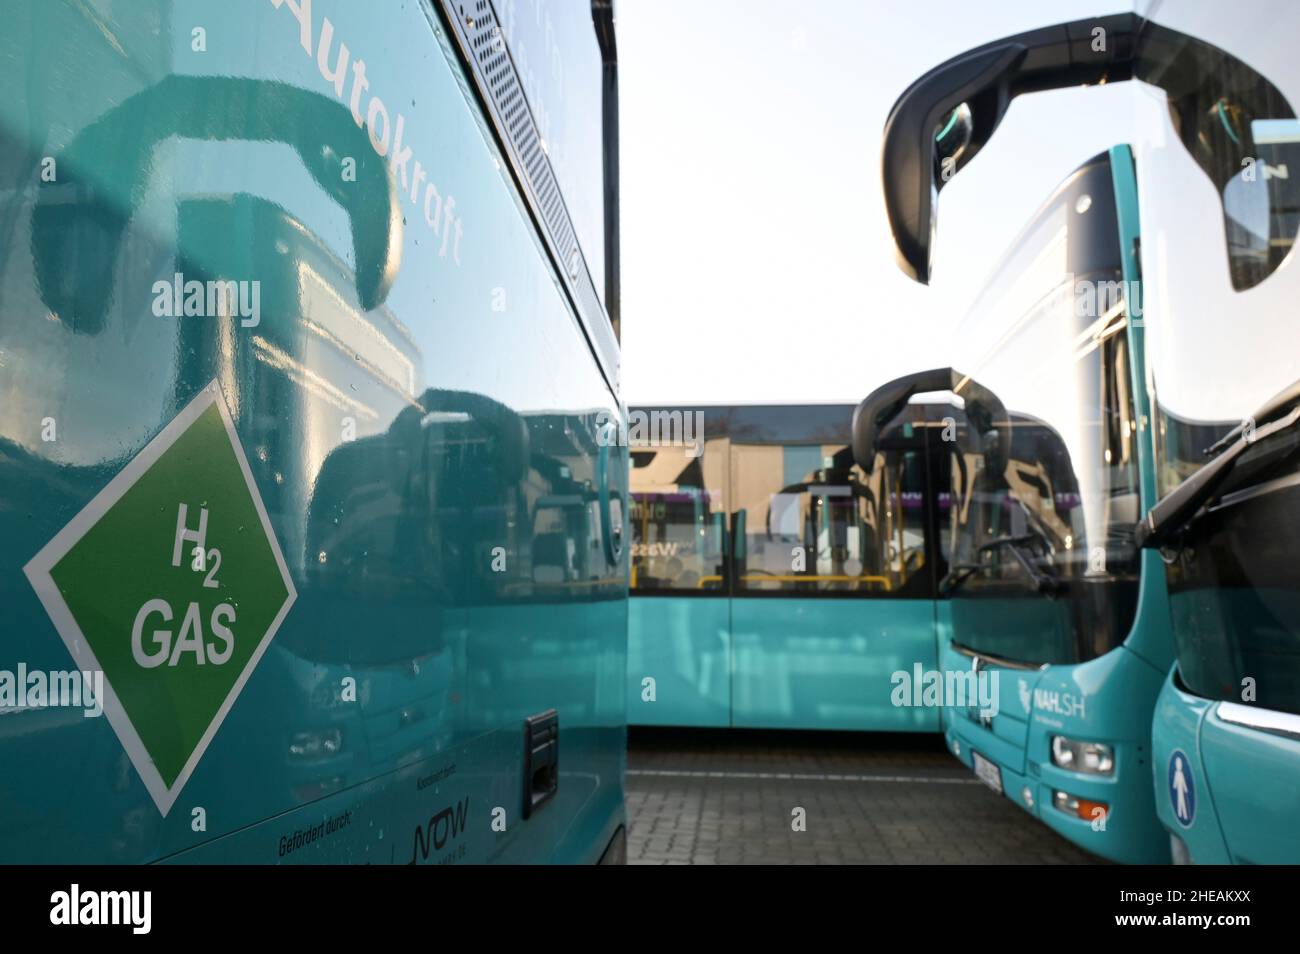 GERMANY, Niebuell, Caetano Bus powered with hydrogen fuel, the public transport bus is operated by DB Autokraft, the green hydrogen is processed in a plant of GP Joule with power from wind farms in the region Stock Photo